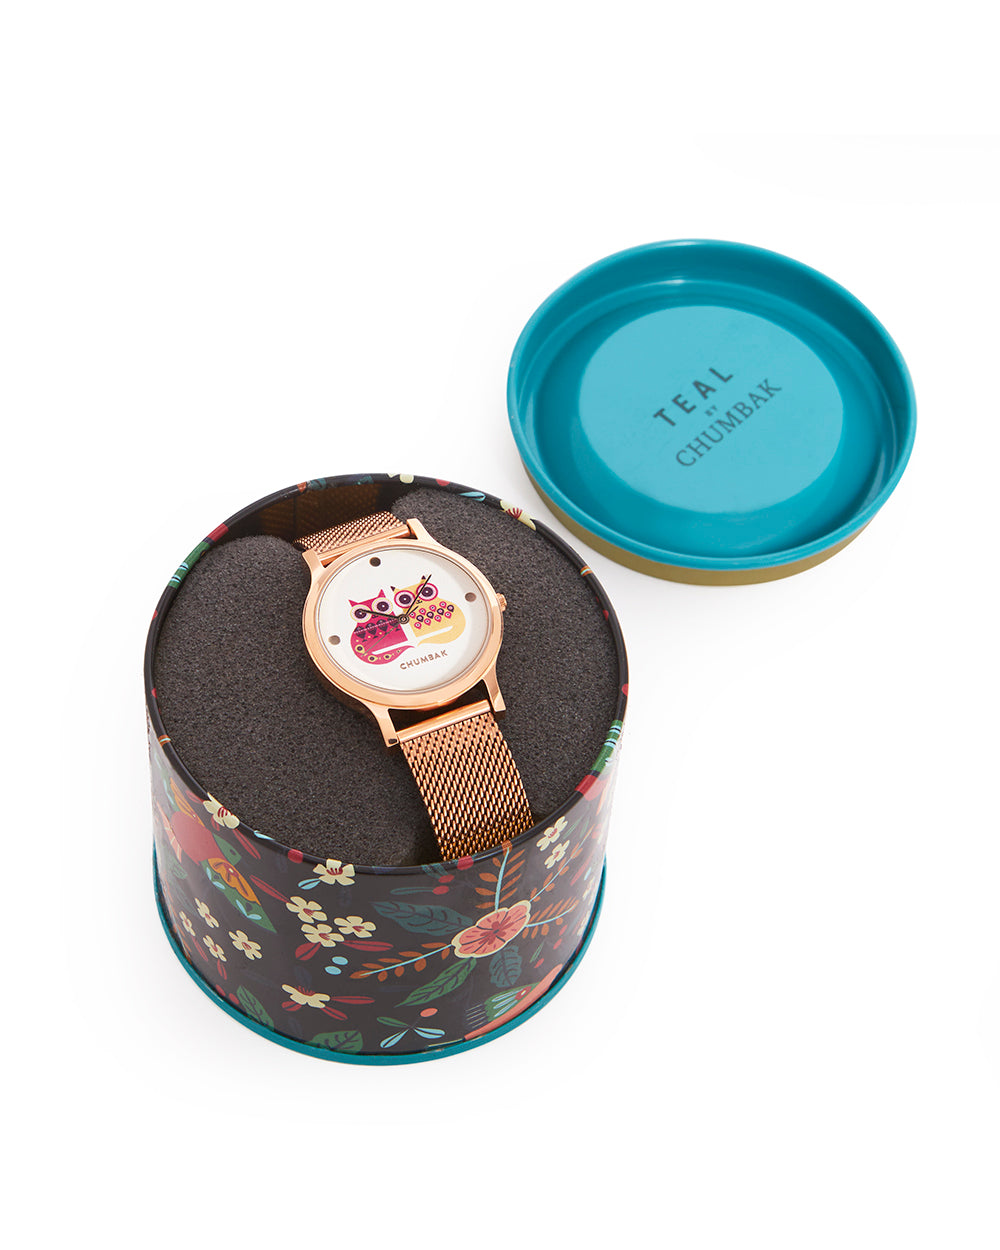 Teal by Chumbak Being Catty Watch,
Stainless Steel Mesh Strap